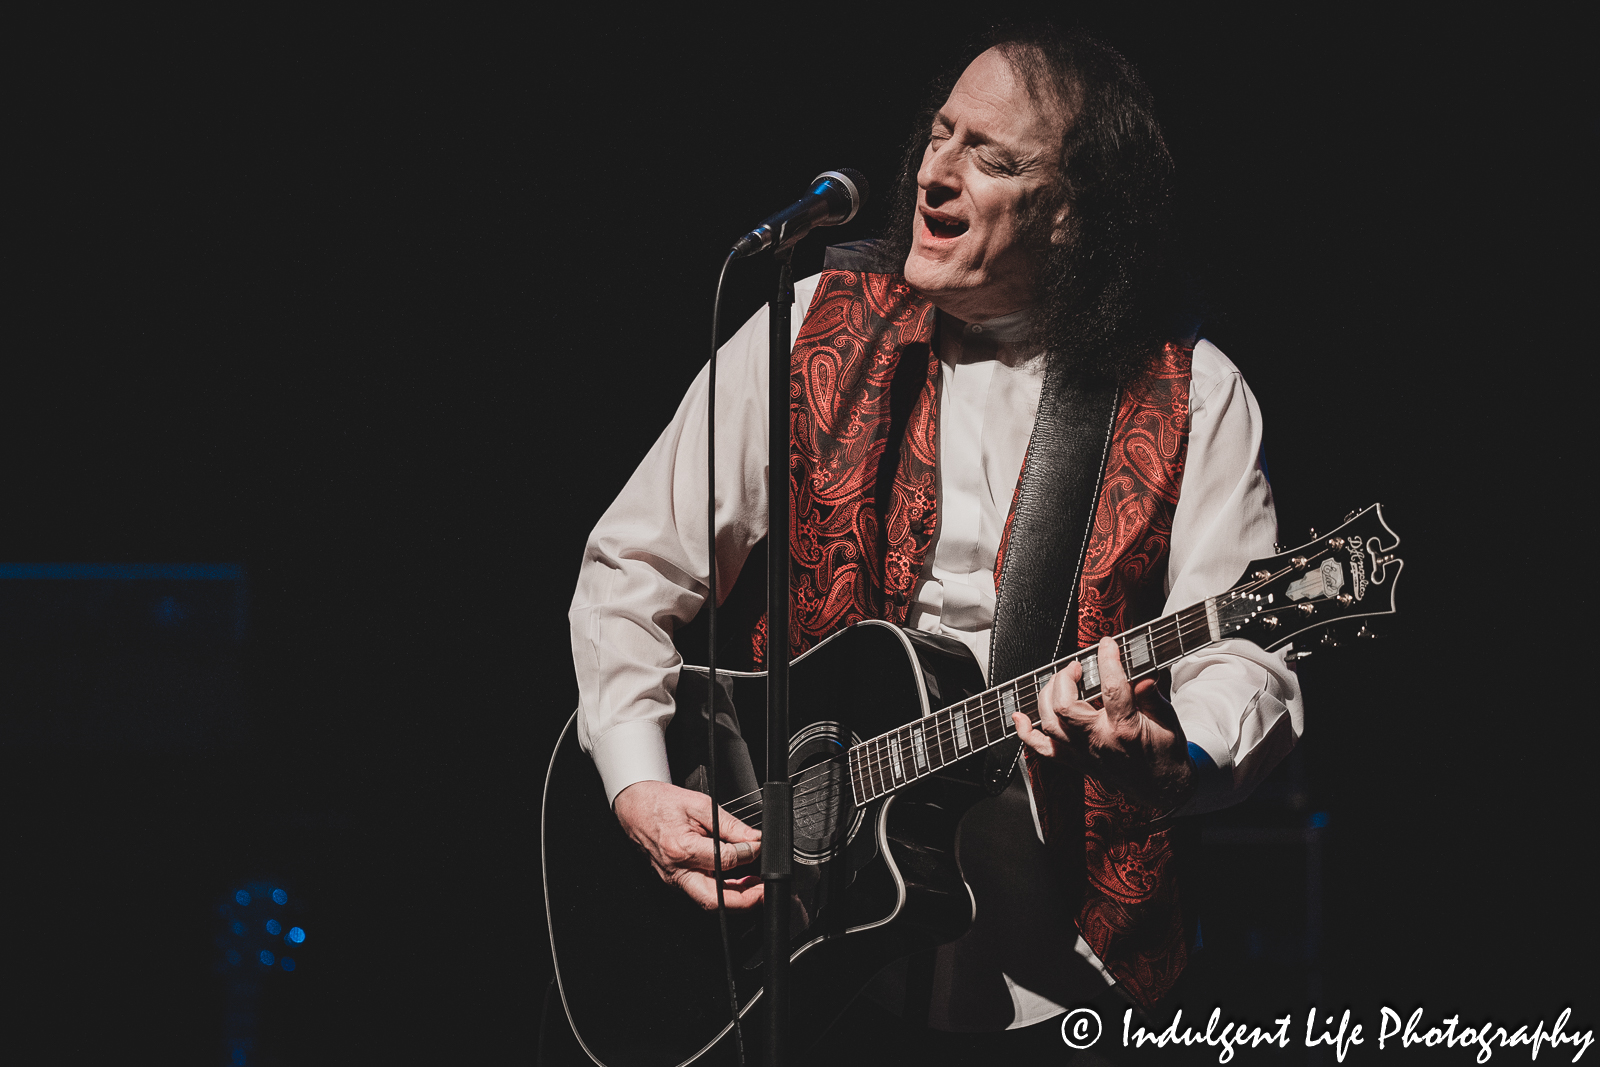 Tommy James performing an acoustic rendition of "I Think We're Alone Now" at Kauffman Center for the Performing Arts in downtown Kansas City, MO on April 1, 2023.